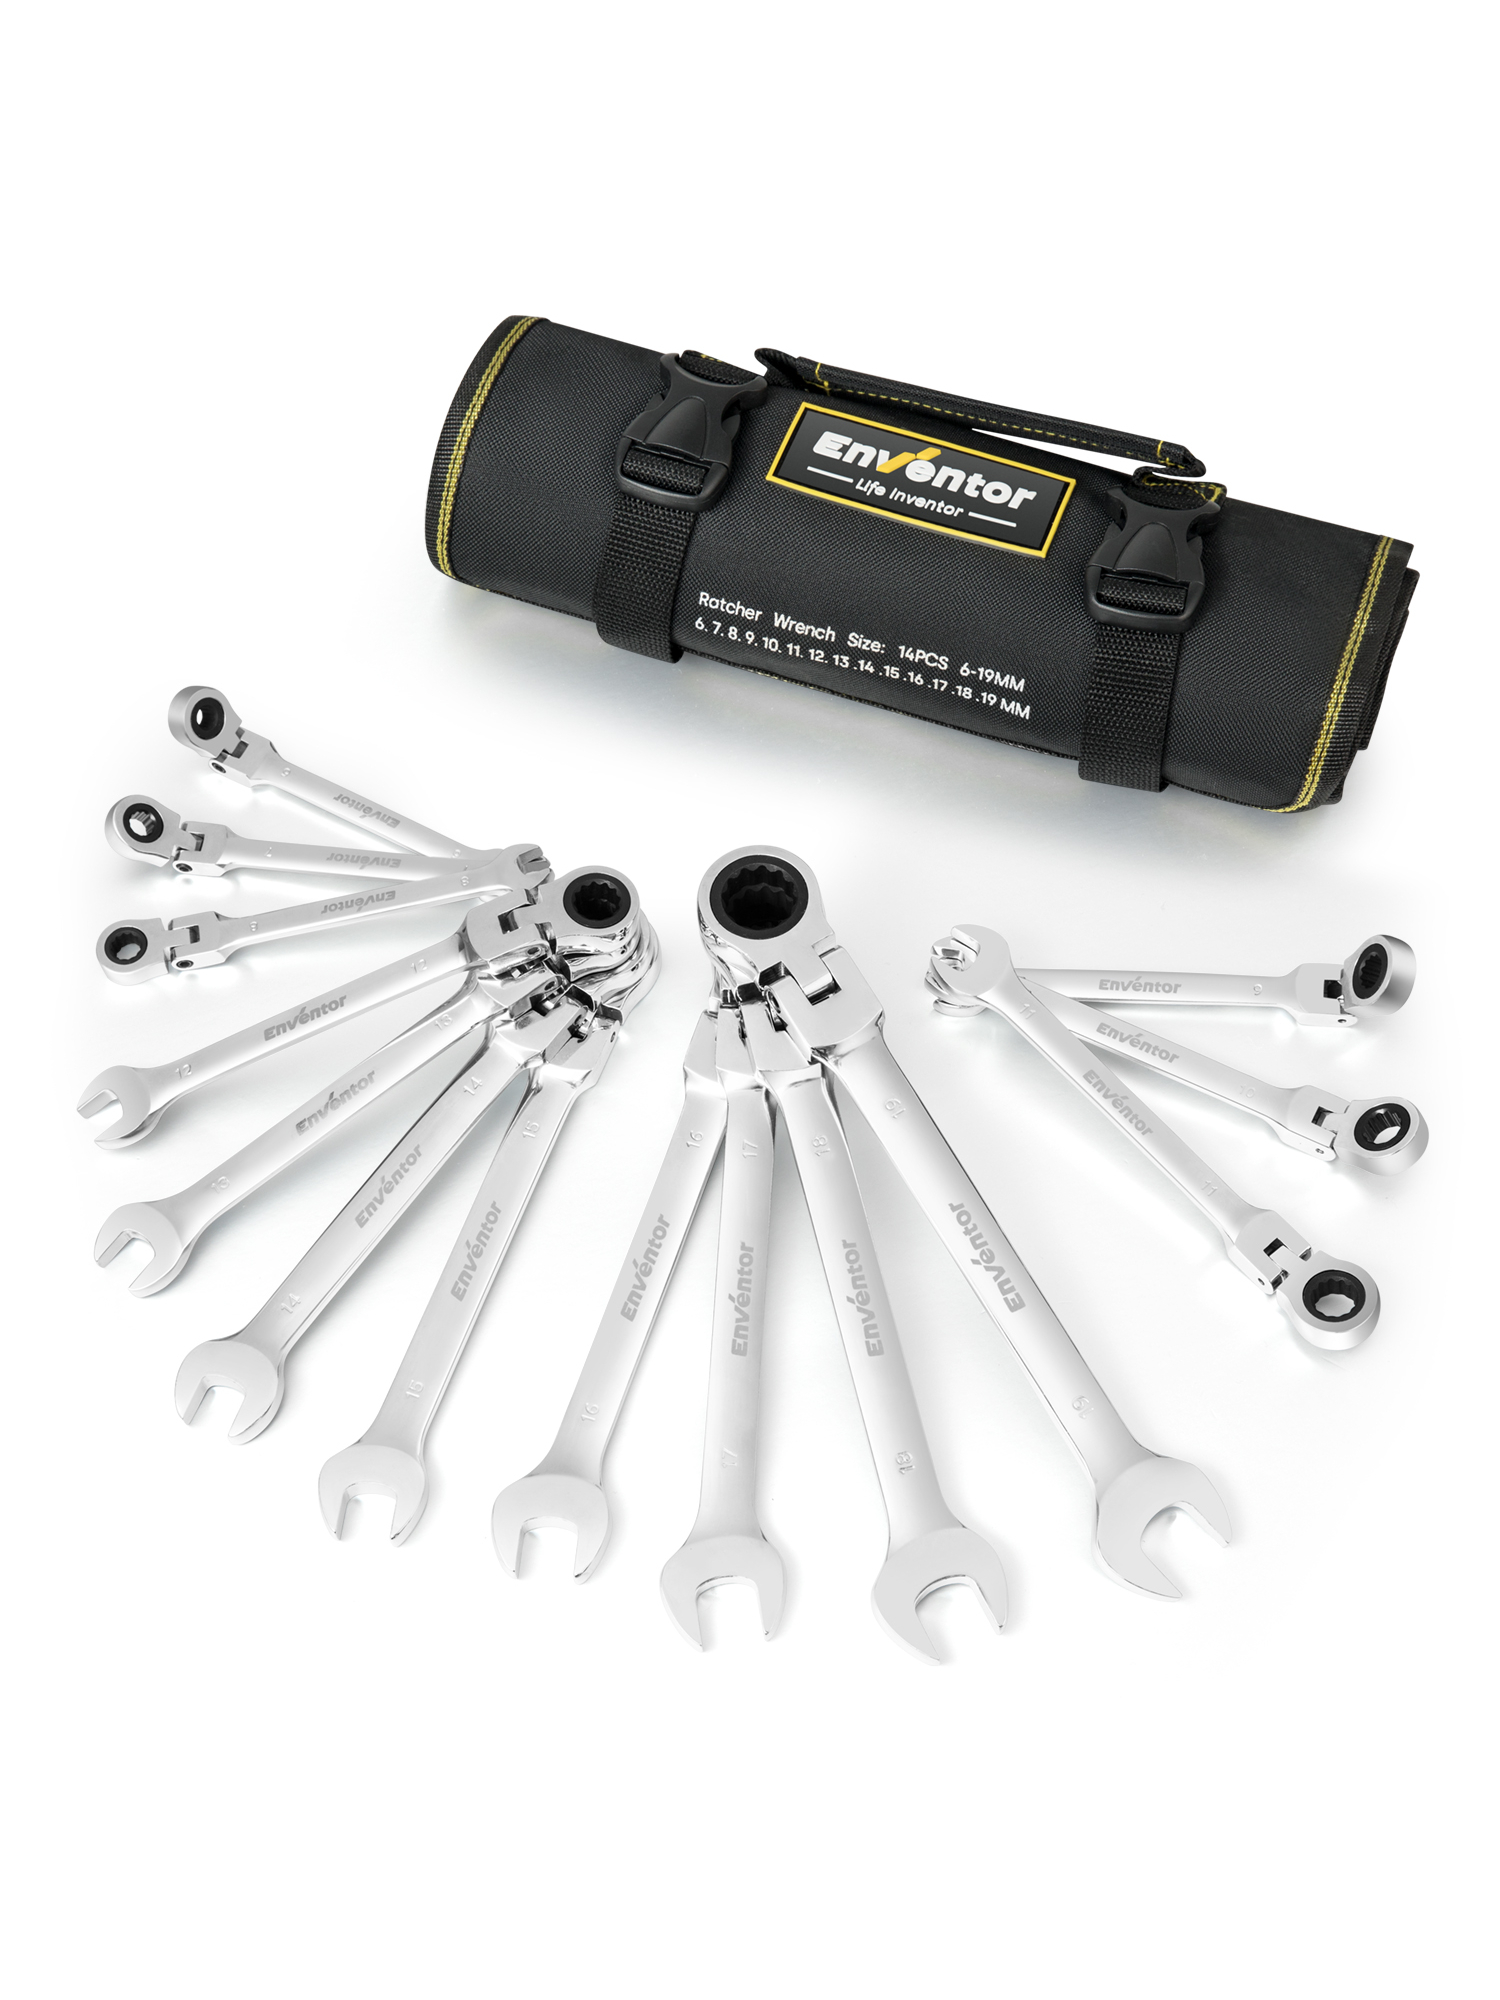 ENVENTOR Flex Head Ratcheting Wrench Set, 14 Pieces Metric 6-19mm, CRV Steel,12-Point Combination Ratchet Wrenches Set